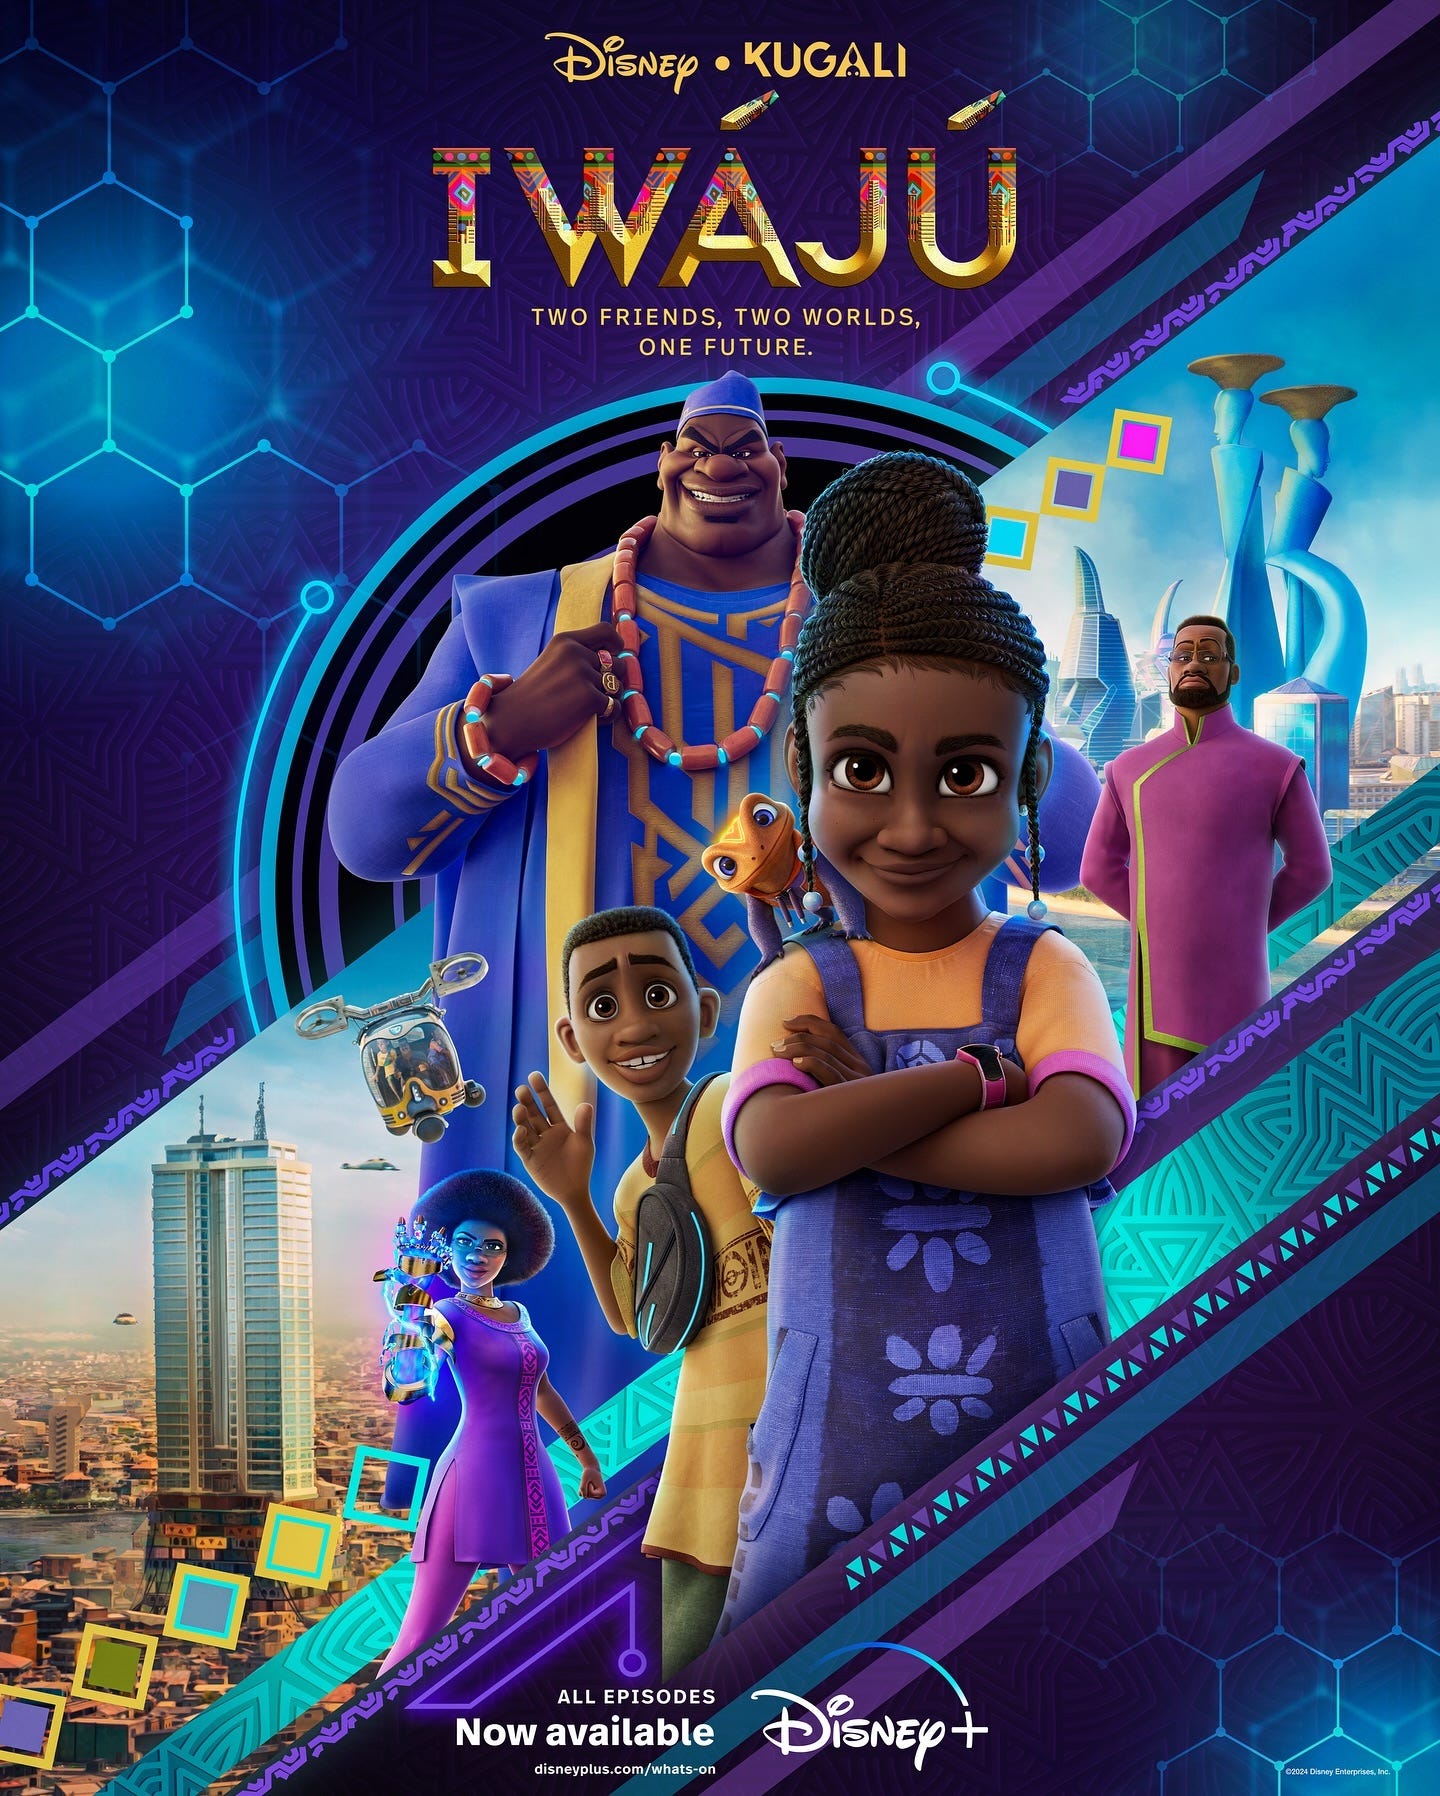 Iwájú, a production of Walt Disney Animation Studios in collaboration with Kugali, a pan-African entertainment company,